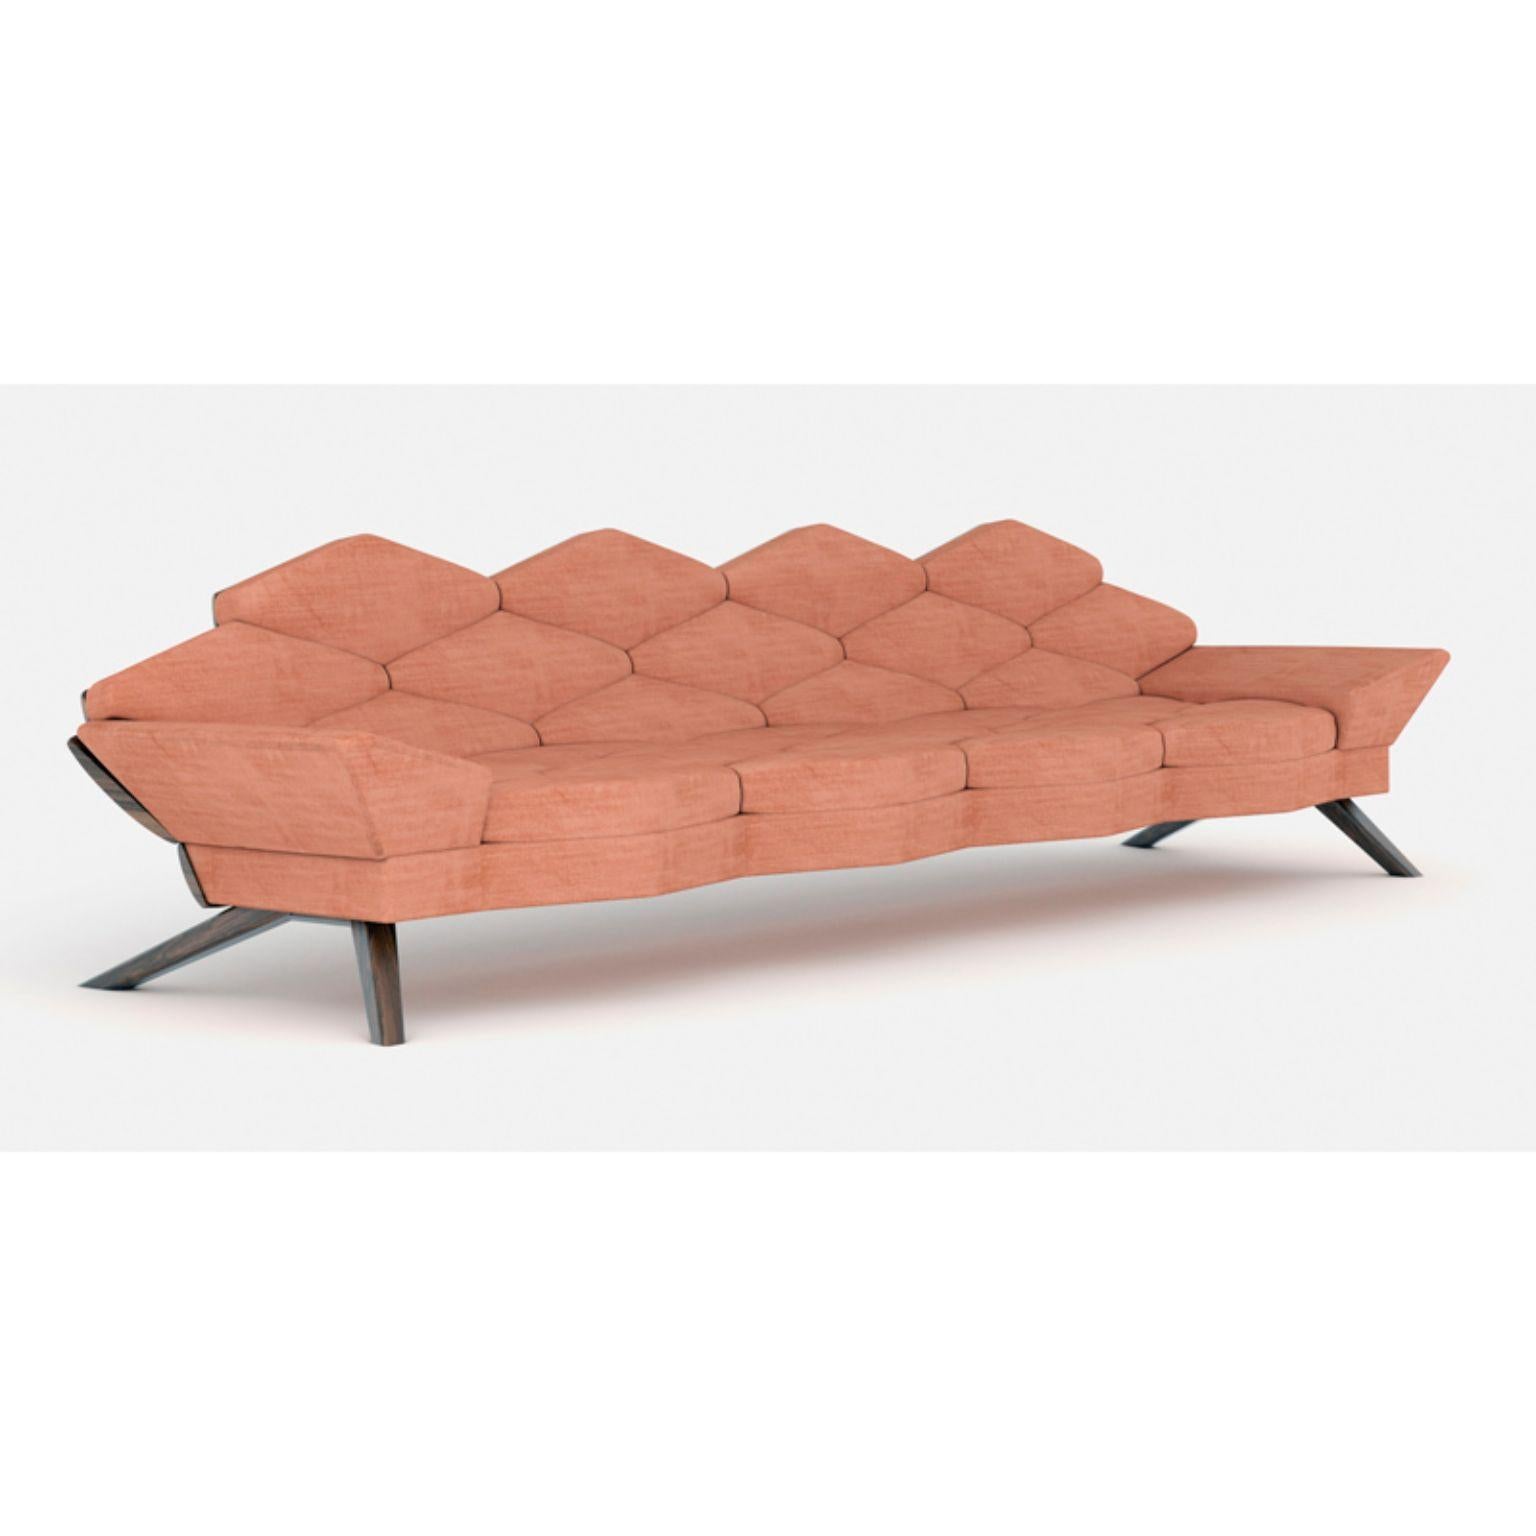 Hive Sofa 400 by Alexandre Caldas
Dimensions: W 400 x D 100 x H 75 cm
Materials: Solid walnut wood, fabric

Materials available in ash, mutene, walnut
Seat available in fabric, leather, corkfabric
Sound system integrated with bluetooth technology